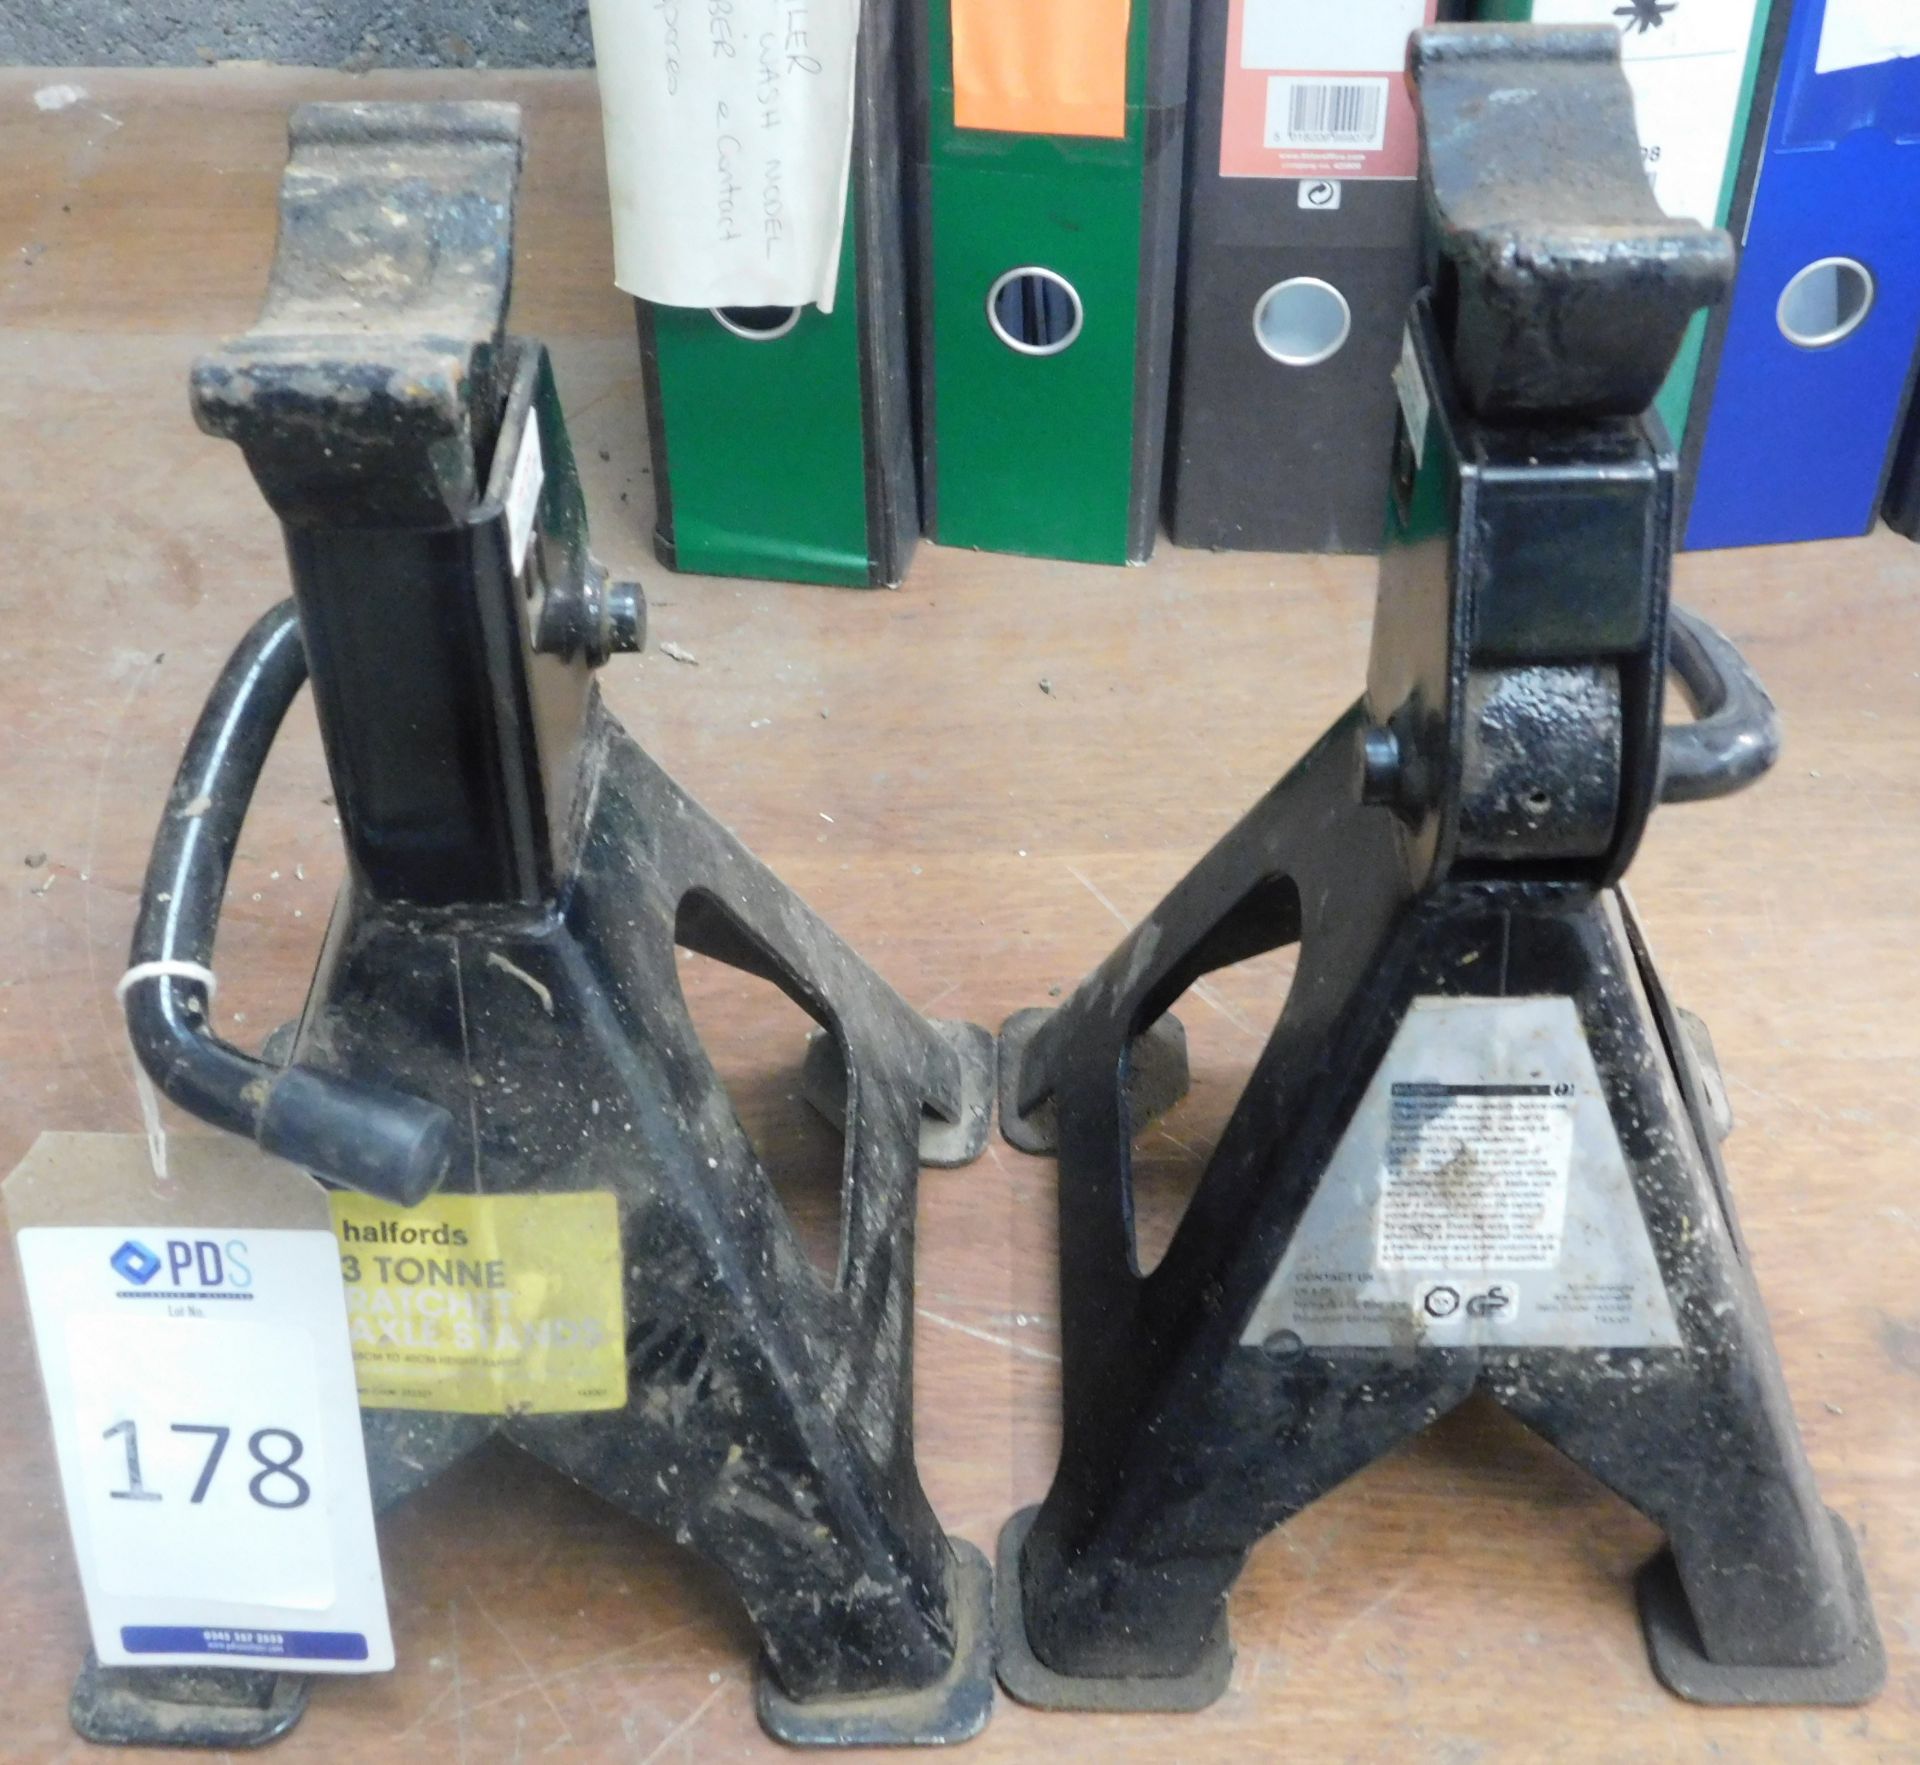 Pair of Halfords 3 Tonne Axle Stands (Location Ashford, Kent. Please Refer to General Notes)